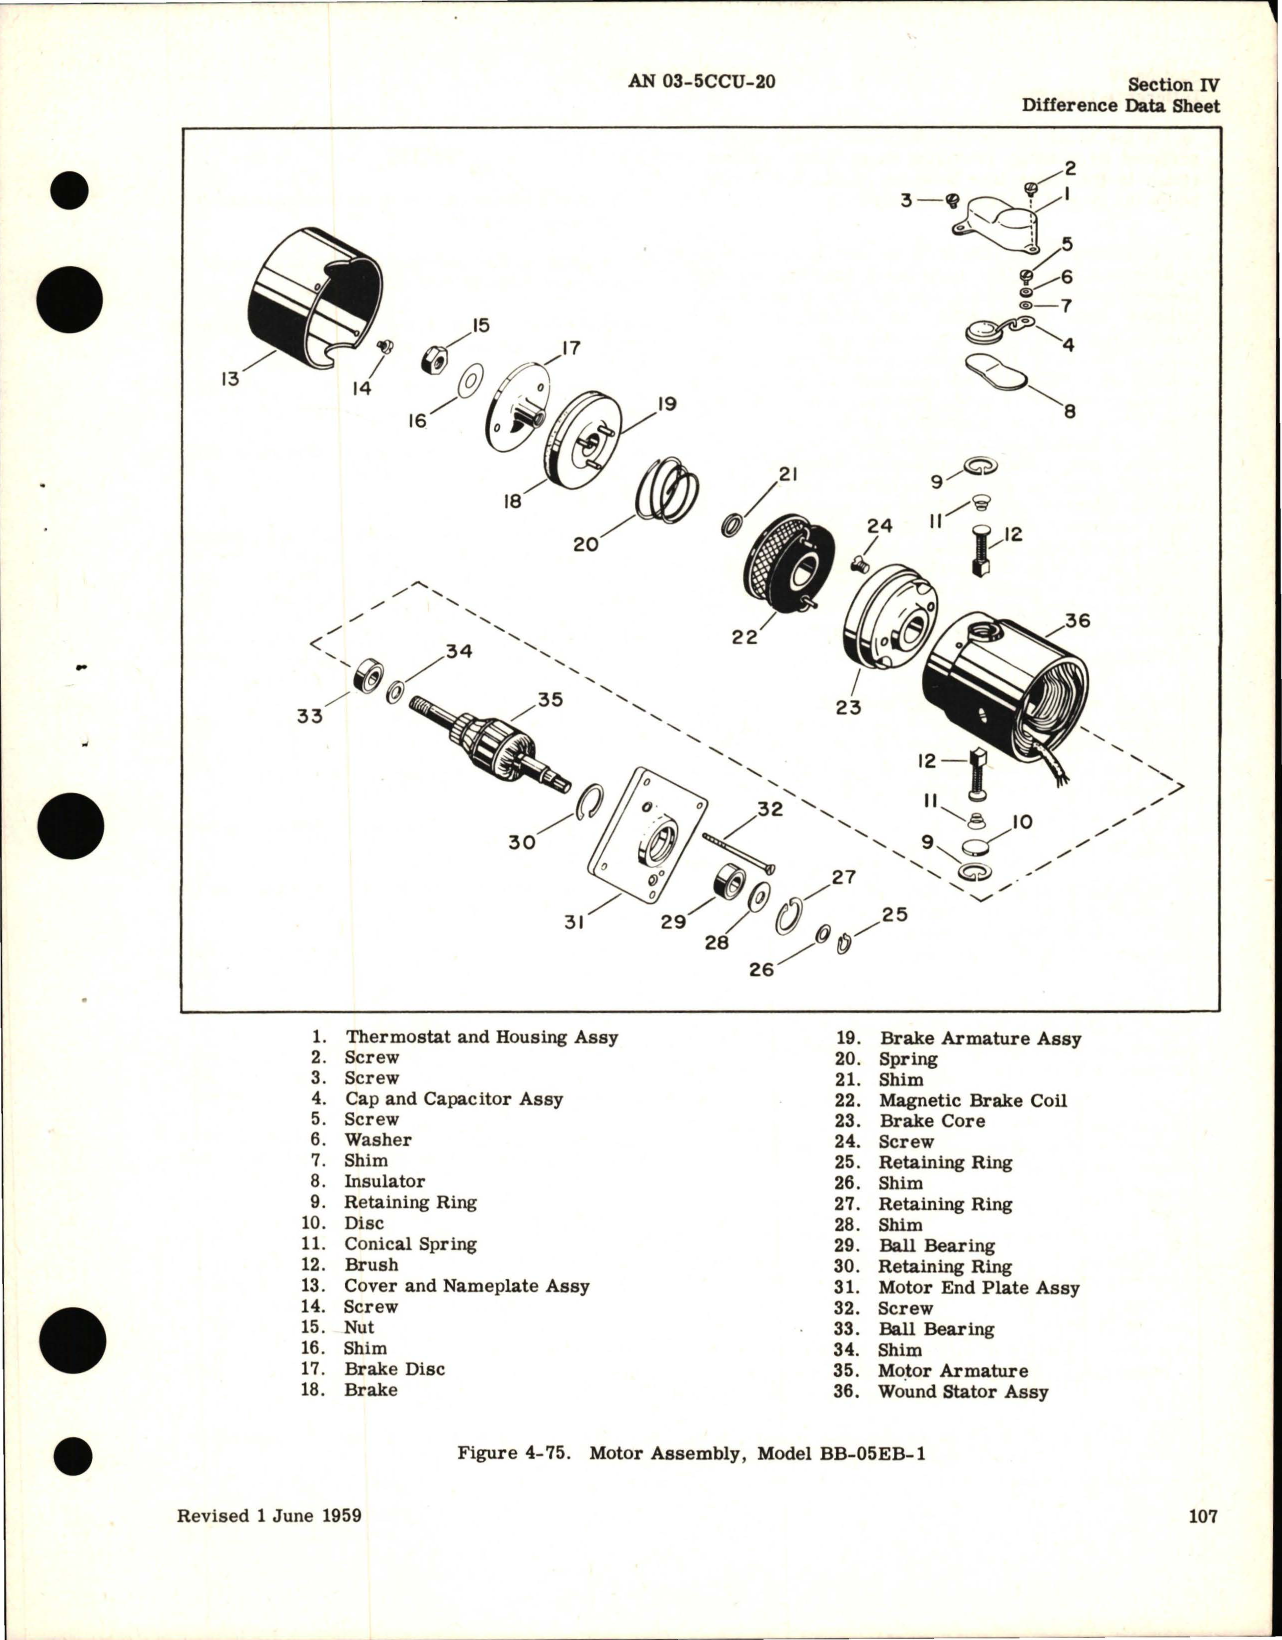 Sample page 7 from AirCorps Library document: Overhaul Instructions for Fractional Horsepower Motors - B Frame Series 